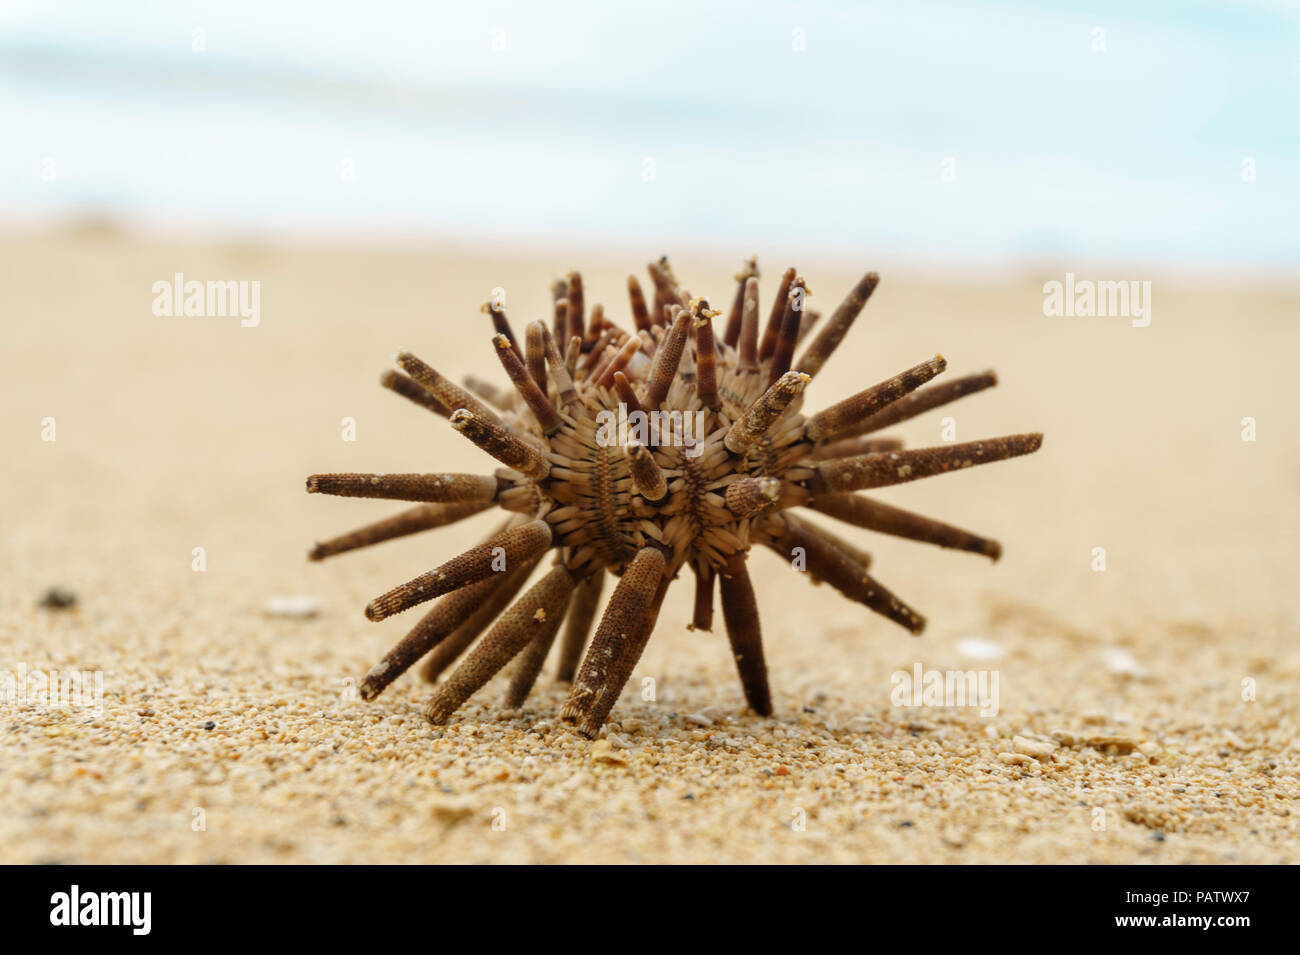 dry French Sea Urchin Specimen on the sand close-up Stock Photo